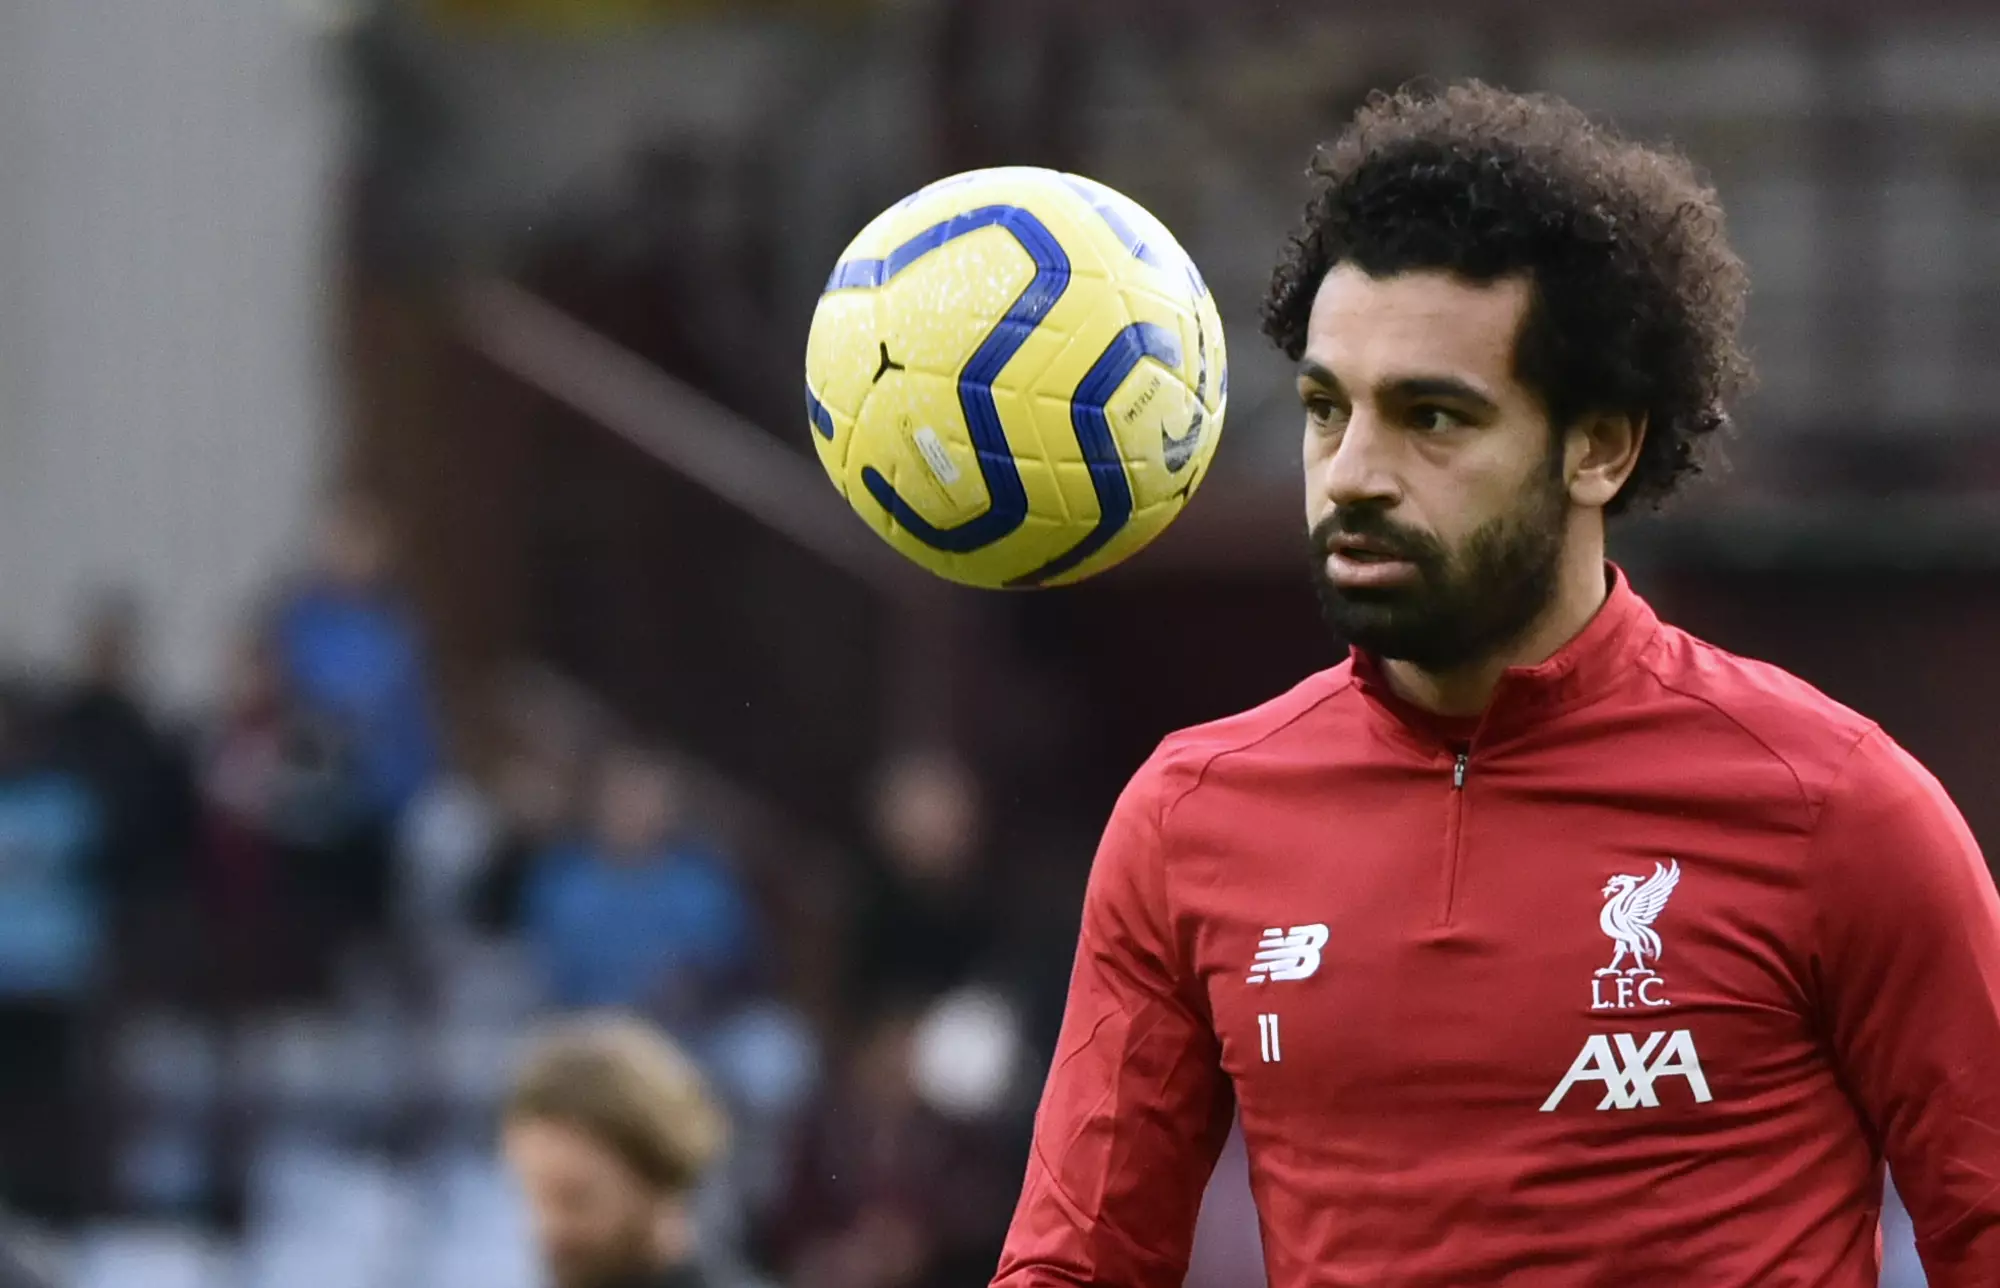 Could Salah move to Real Madrid? Image: PA Images